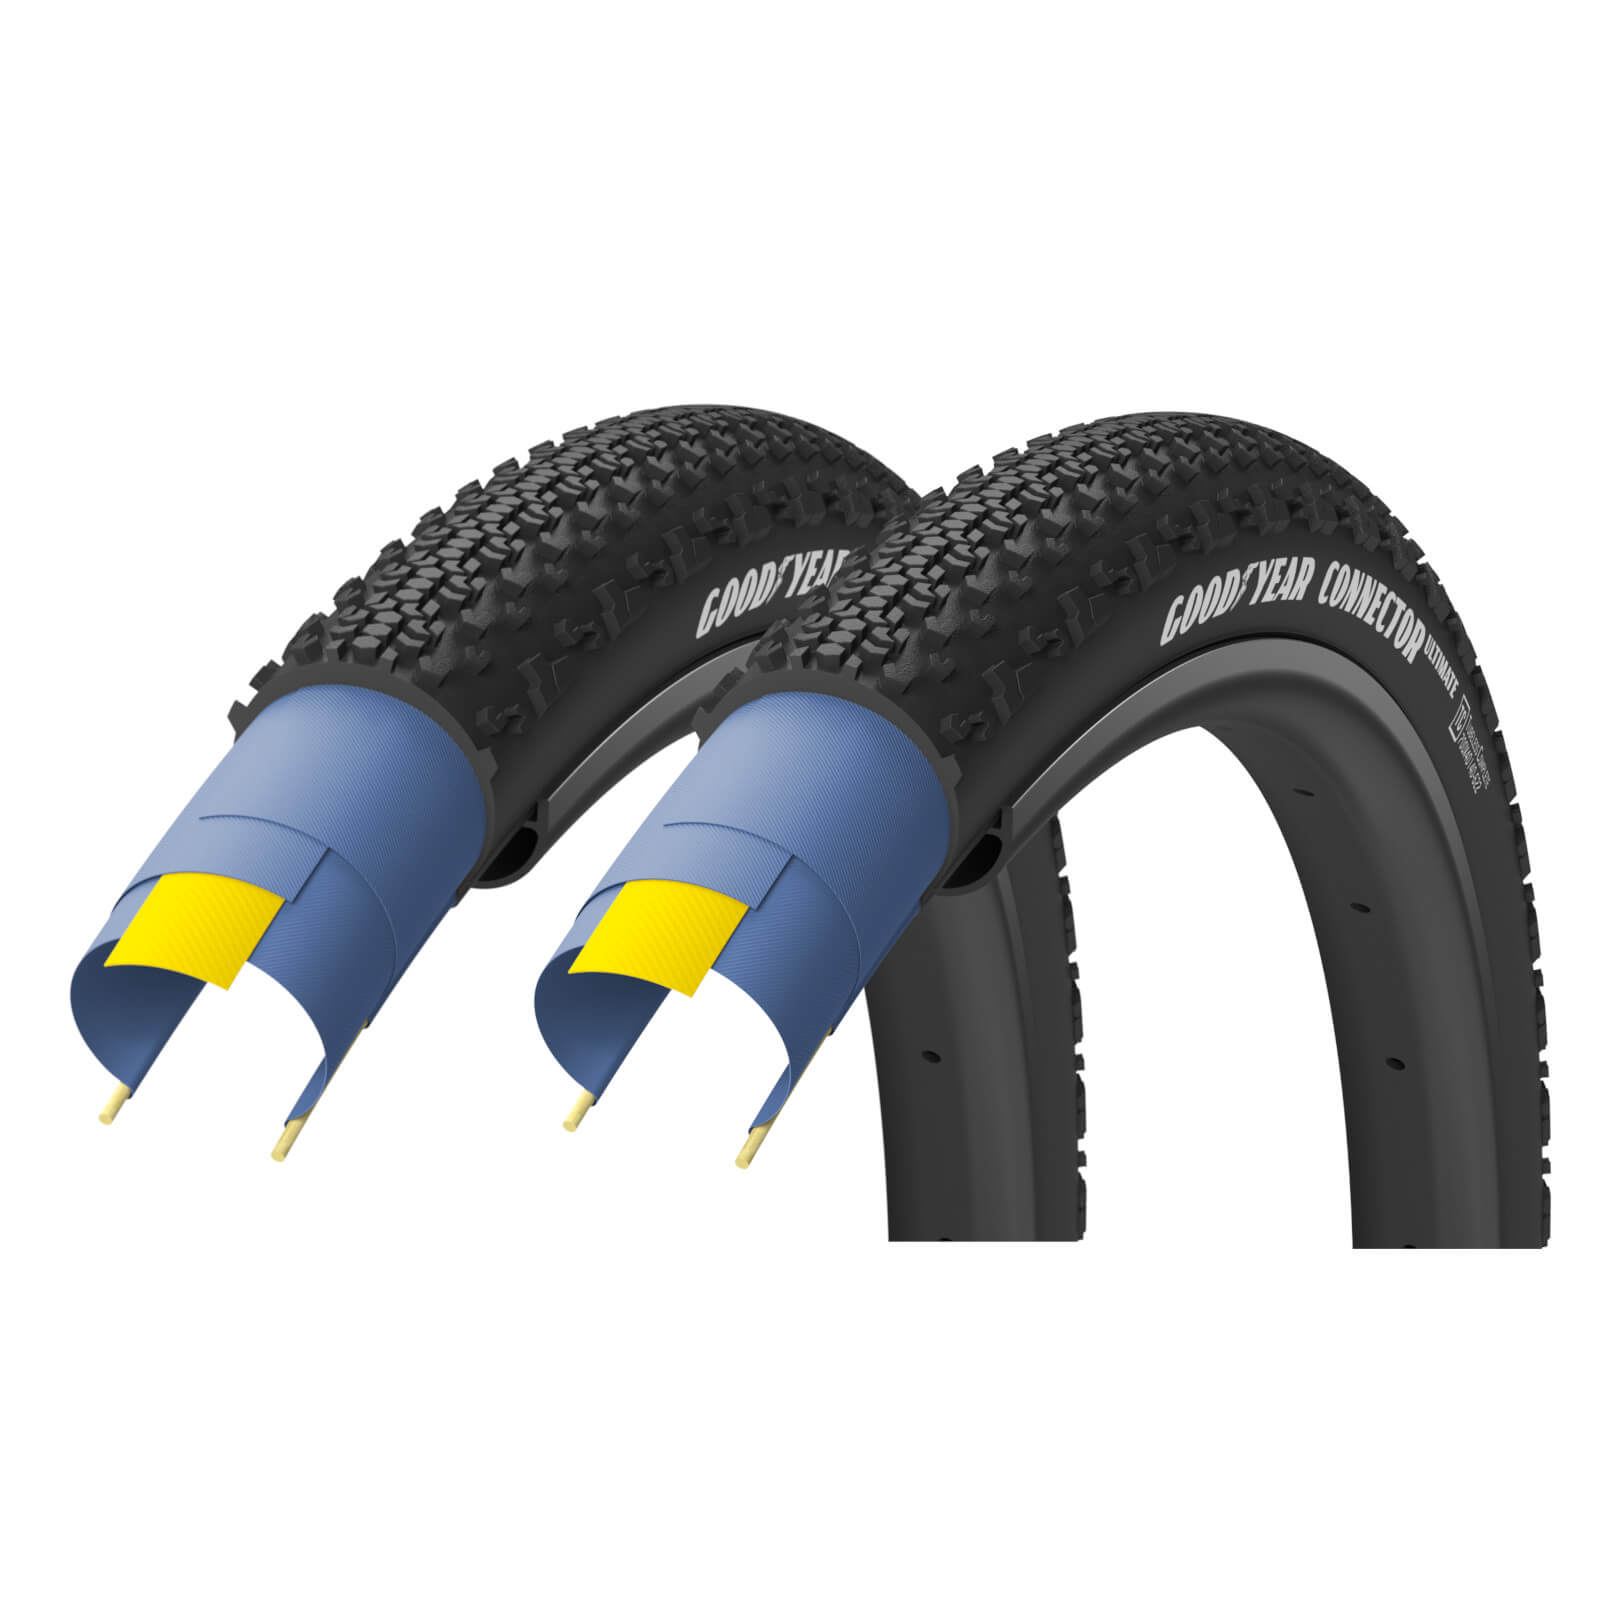 Goodyear Connector Ultimate A/T Tubeless Gravel Tyre Twin Pack - 700c x 35mm - Black